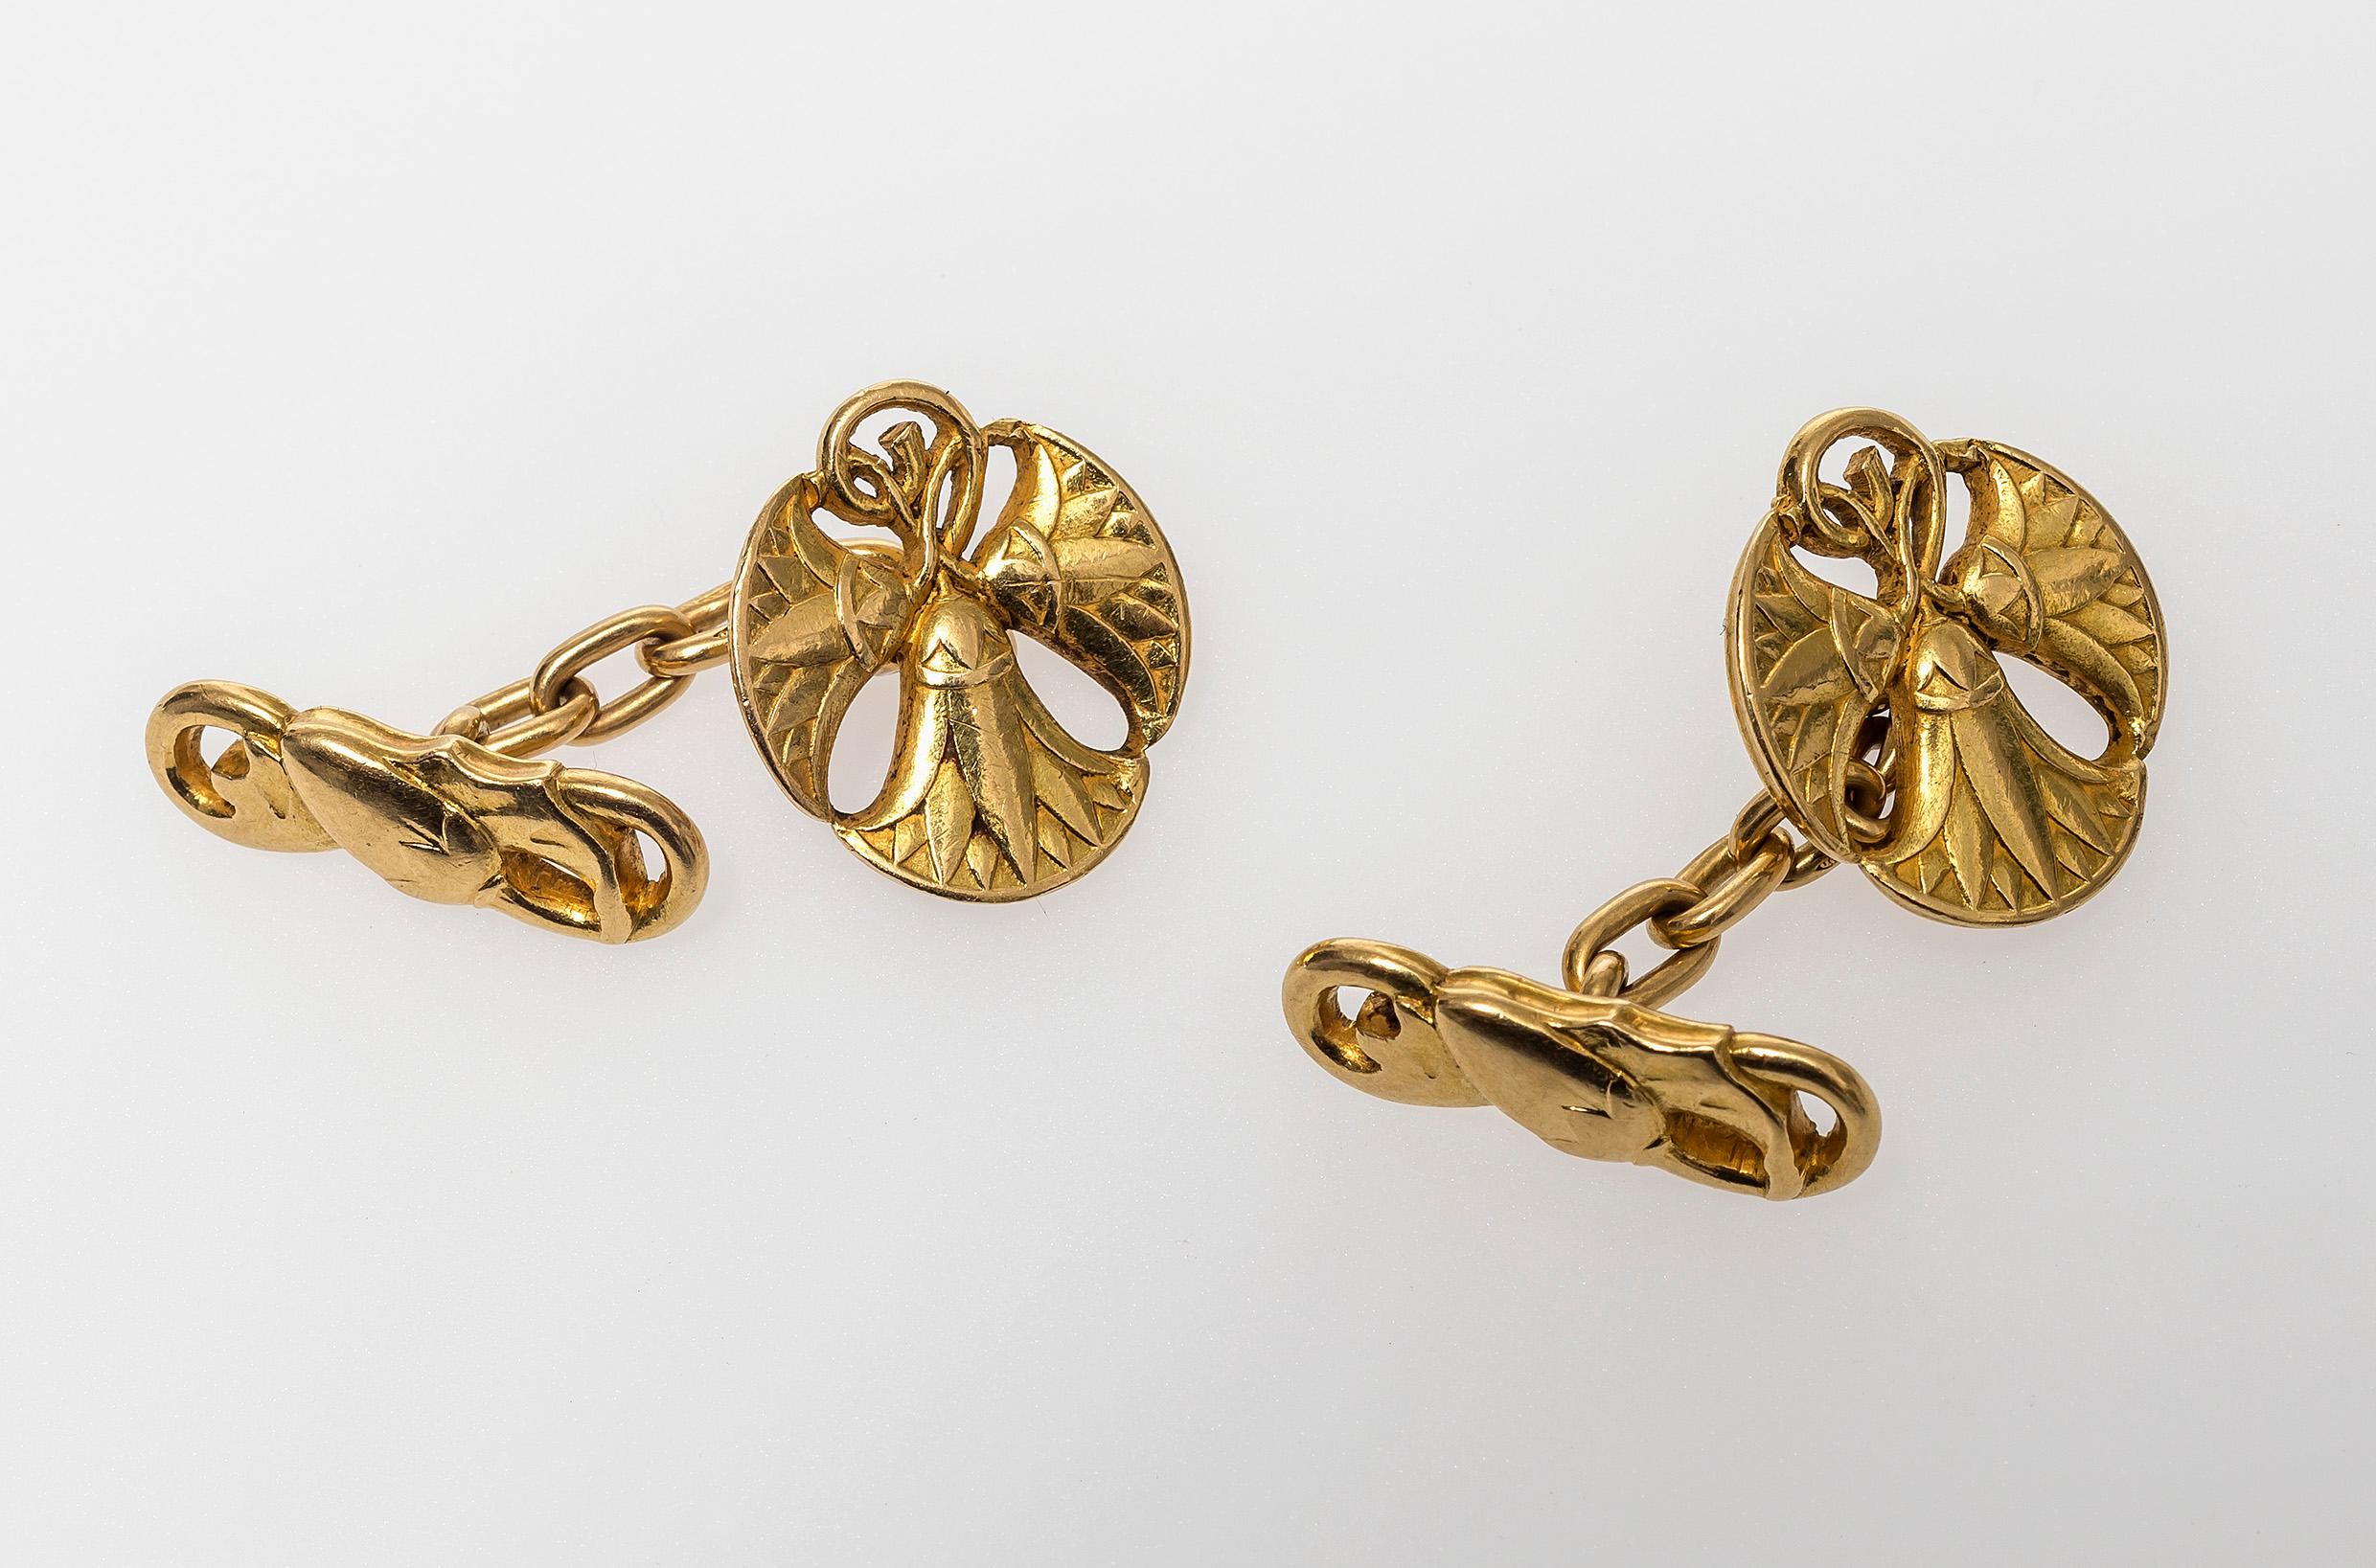 These highly elegant and unusual French 18K gold cufflinks are designed as three entwined lotus flowers on one link and a flower bud on the other. The lotus flowers resemble the flowers that are found on mural paintings in the burial chambers of